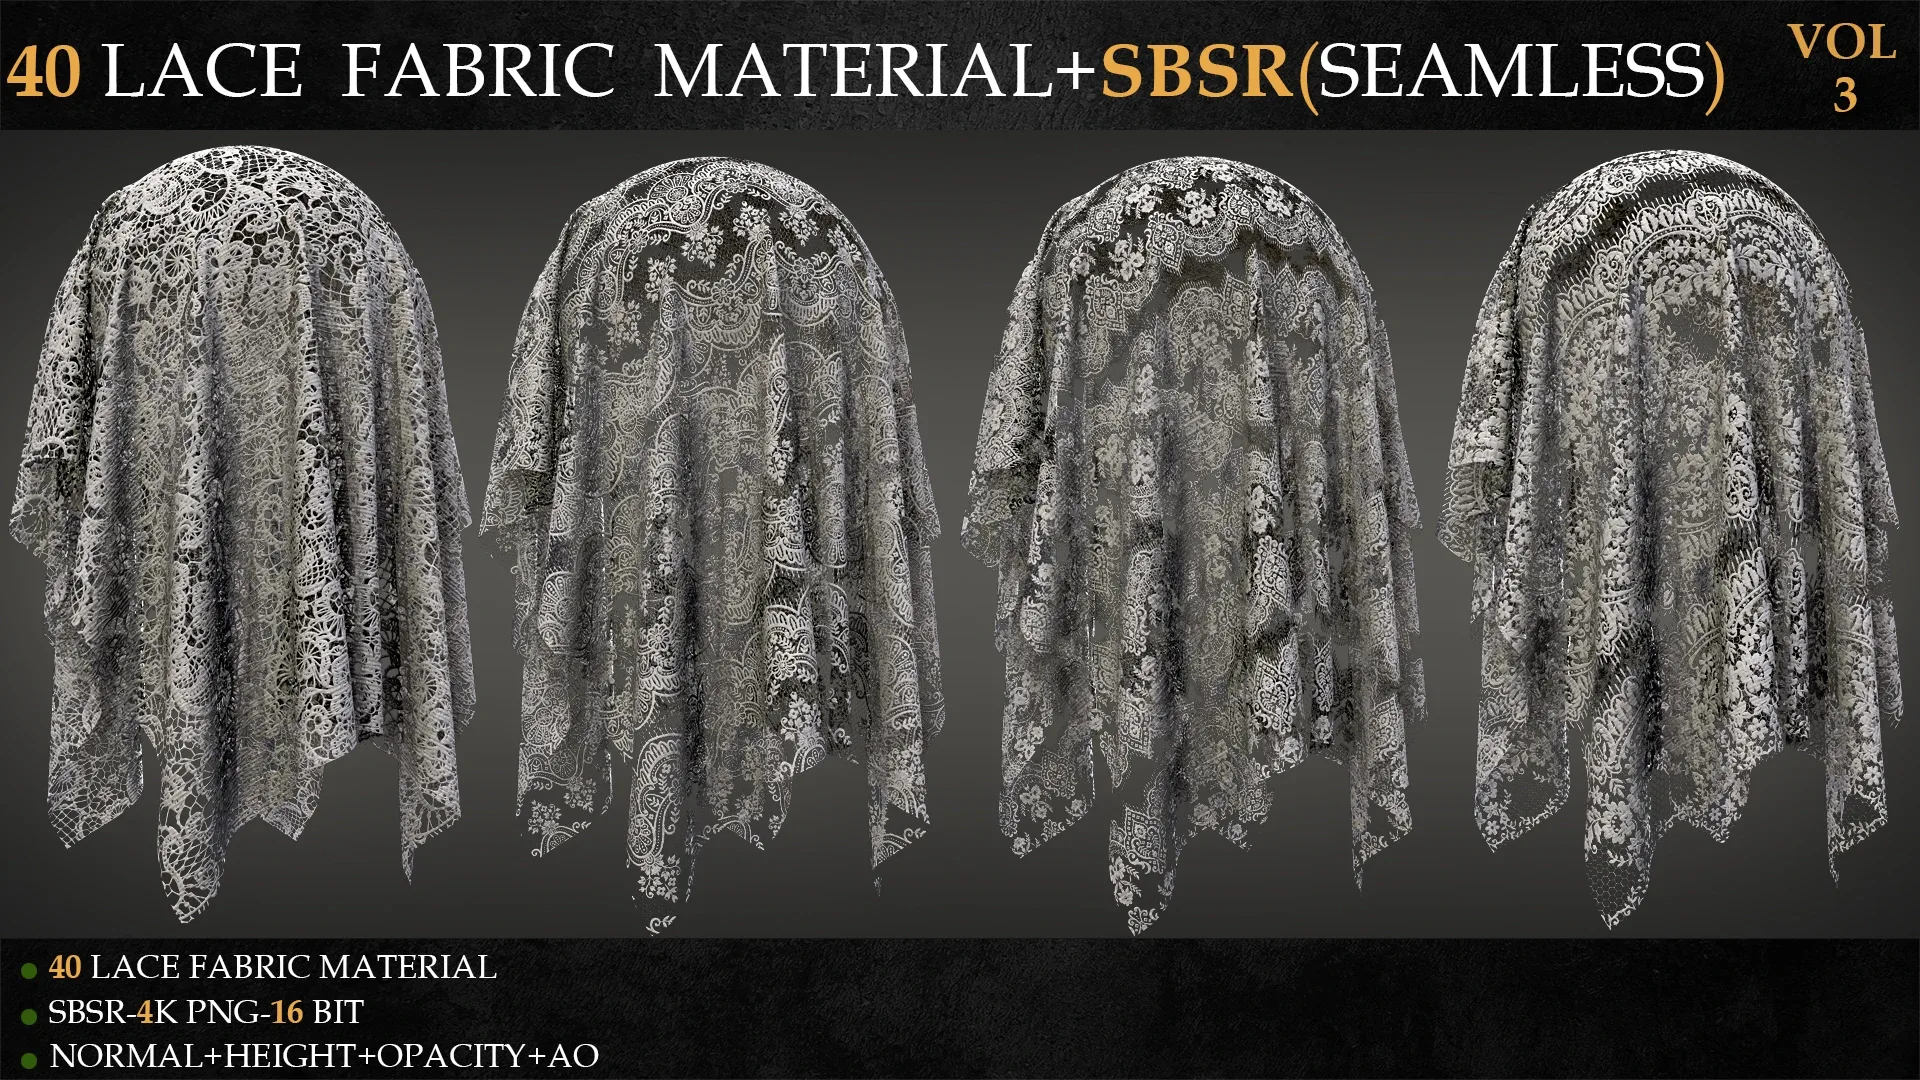 40 LACE FABRIC MATERIAL+SBSR(SEAMLESS)-VOL 3